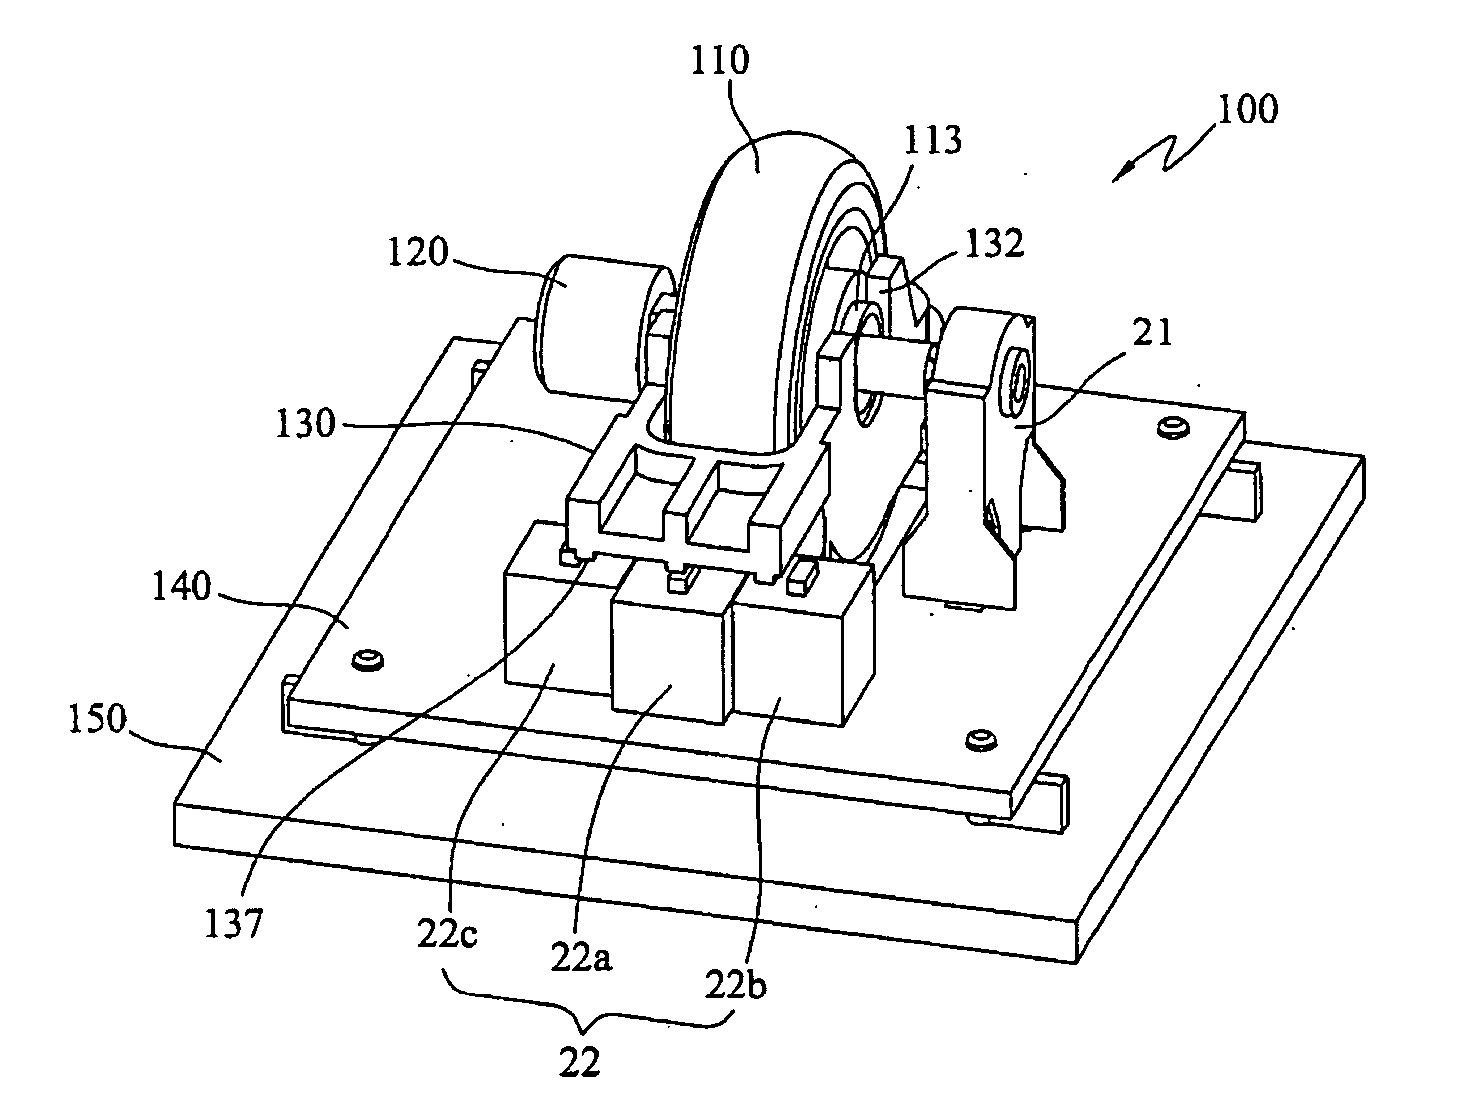 Roller mechanism for multiple directions control